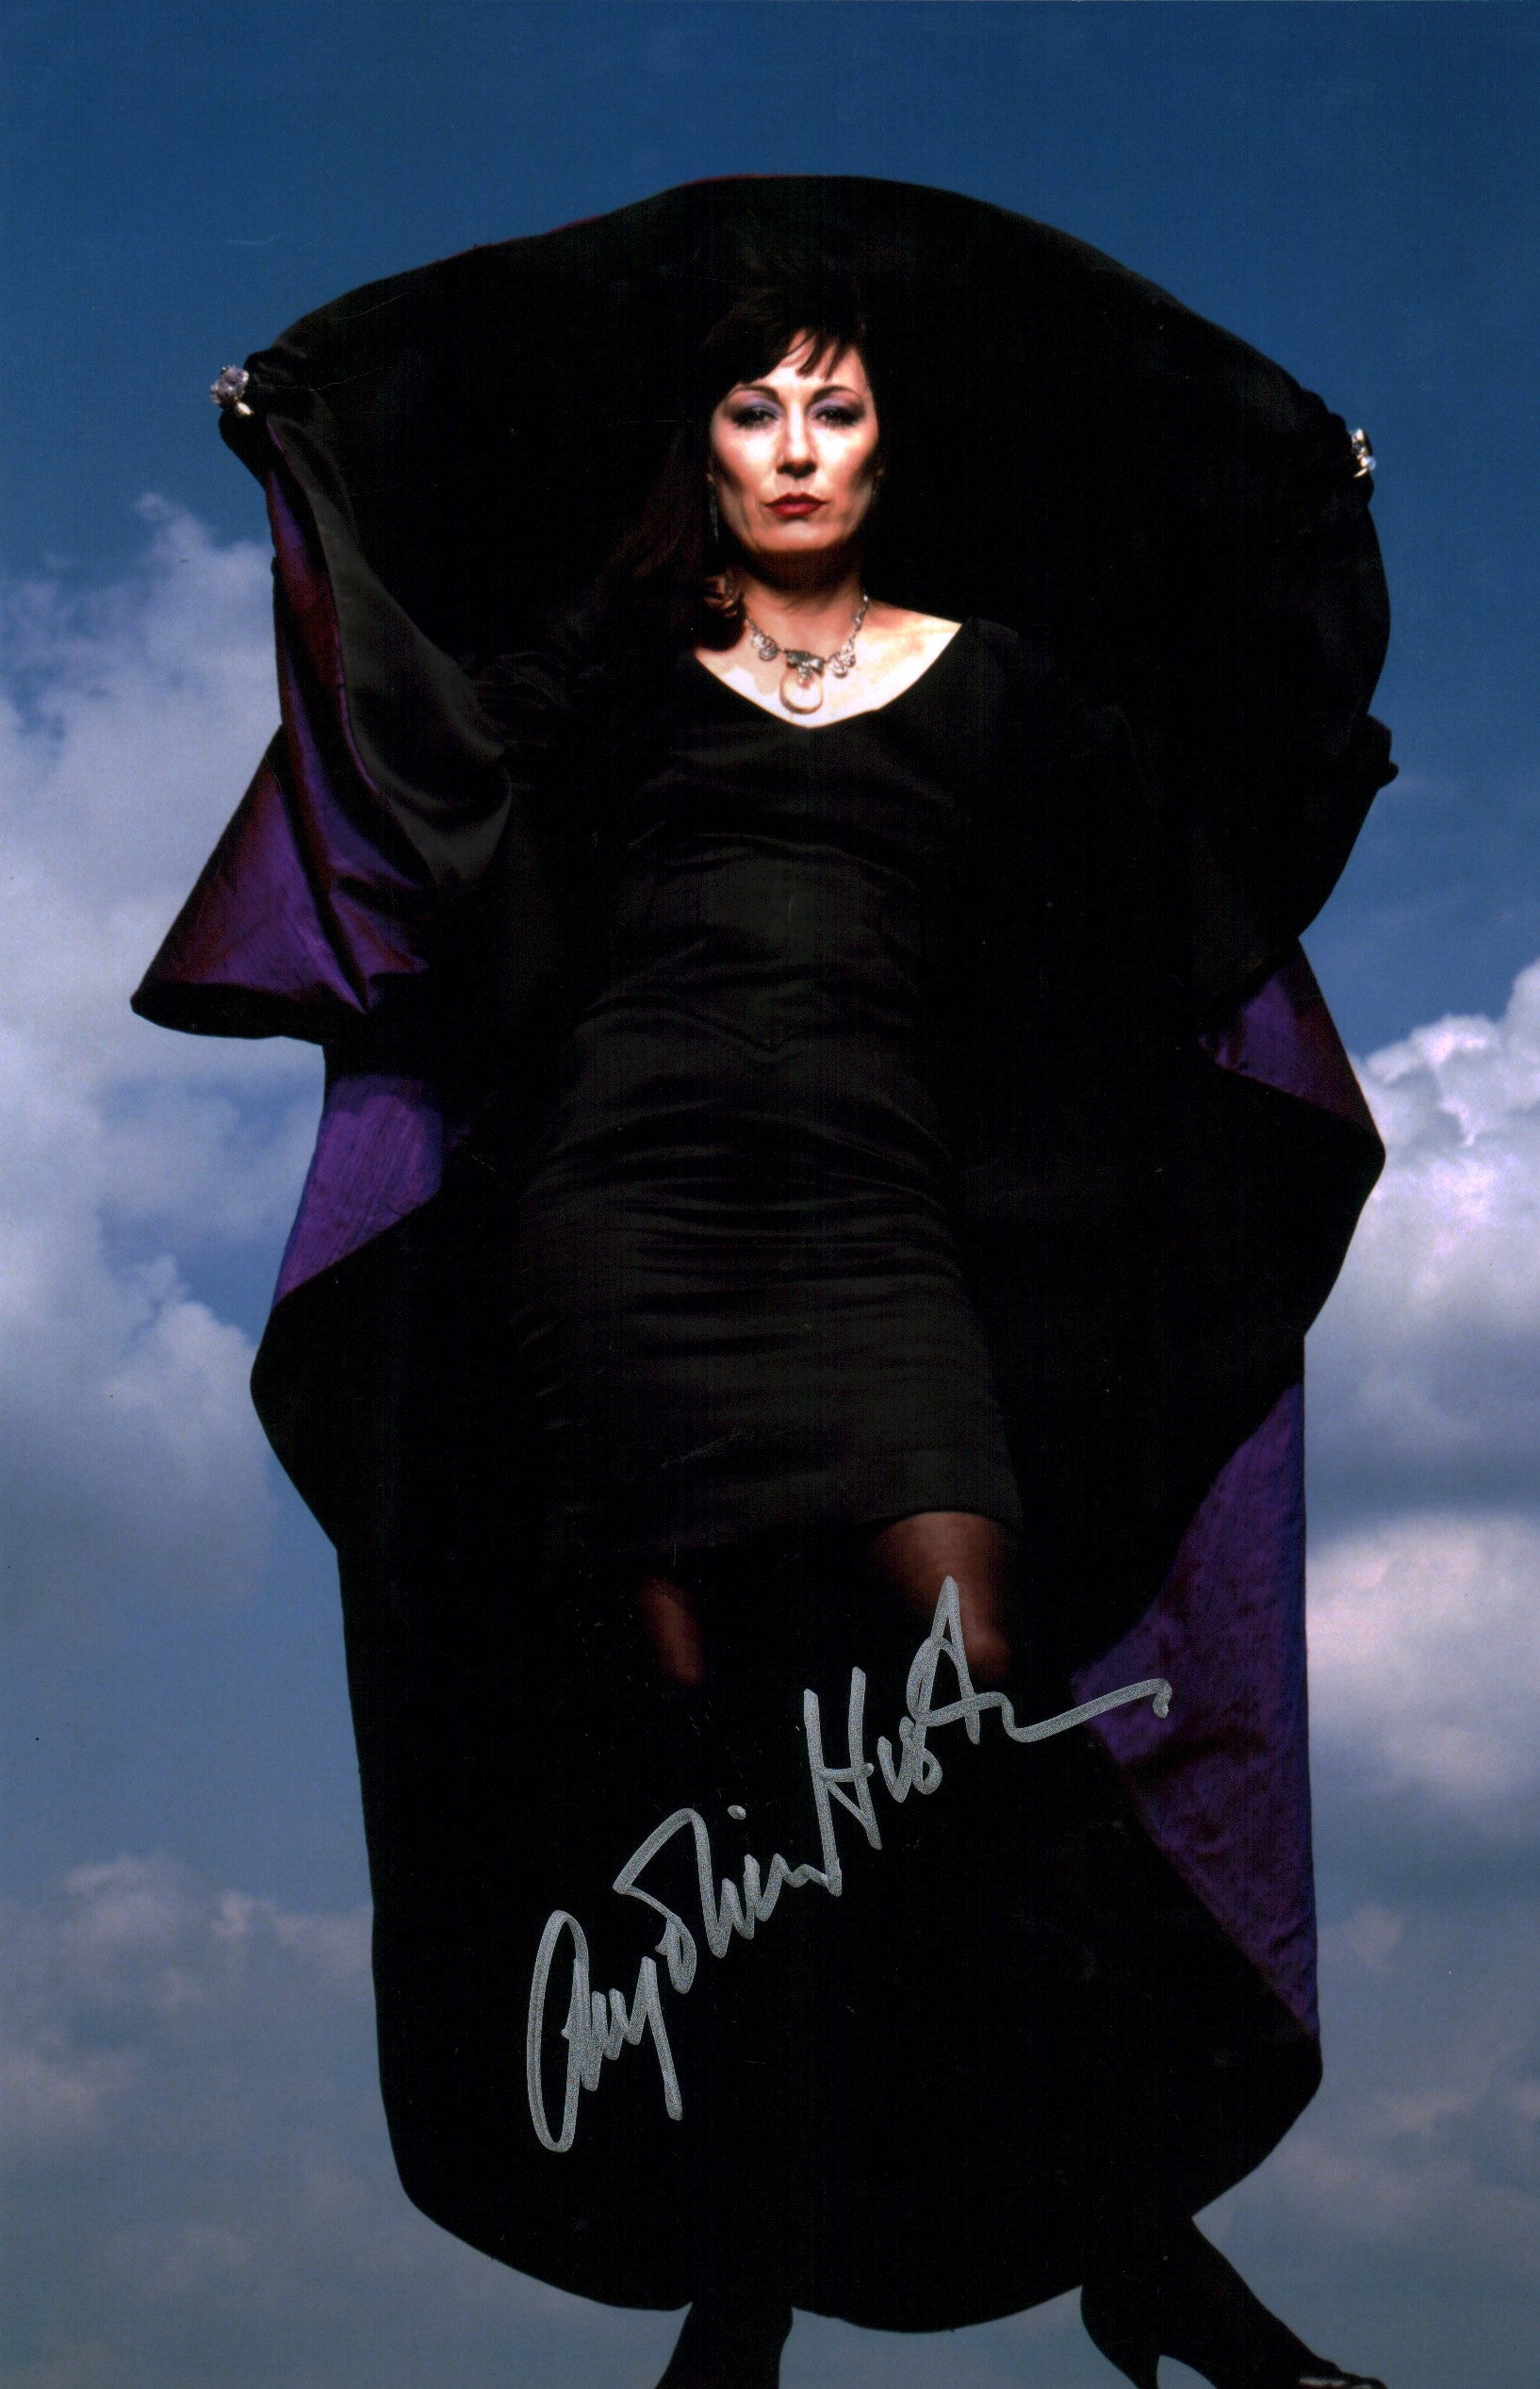 Anjelica Huston The Witches 11x17 Signed Photo Poster JSA COA Certified Autograph GalaxyCon